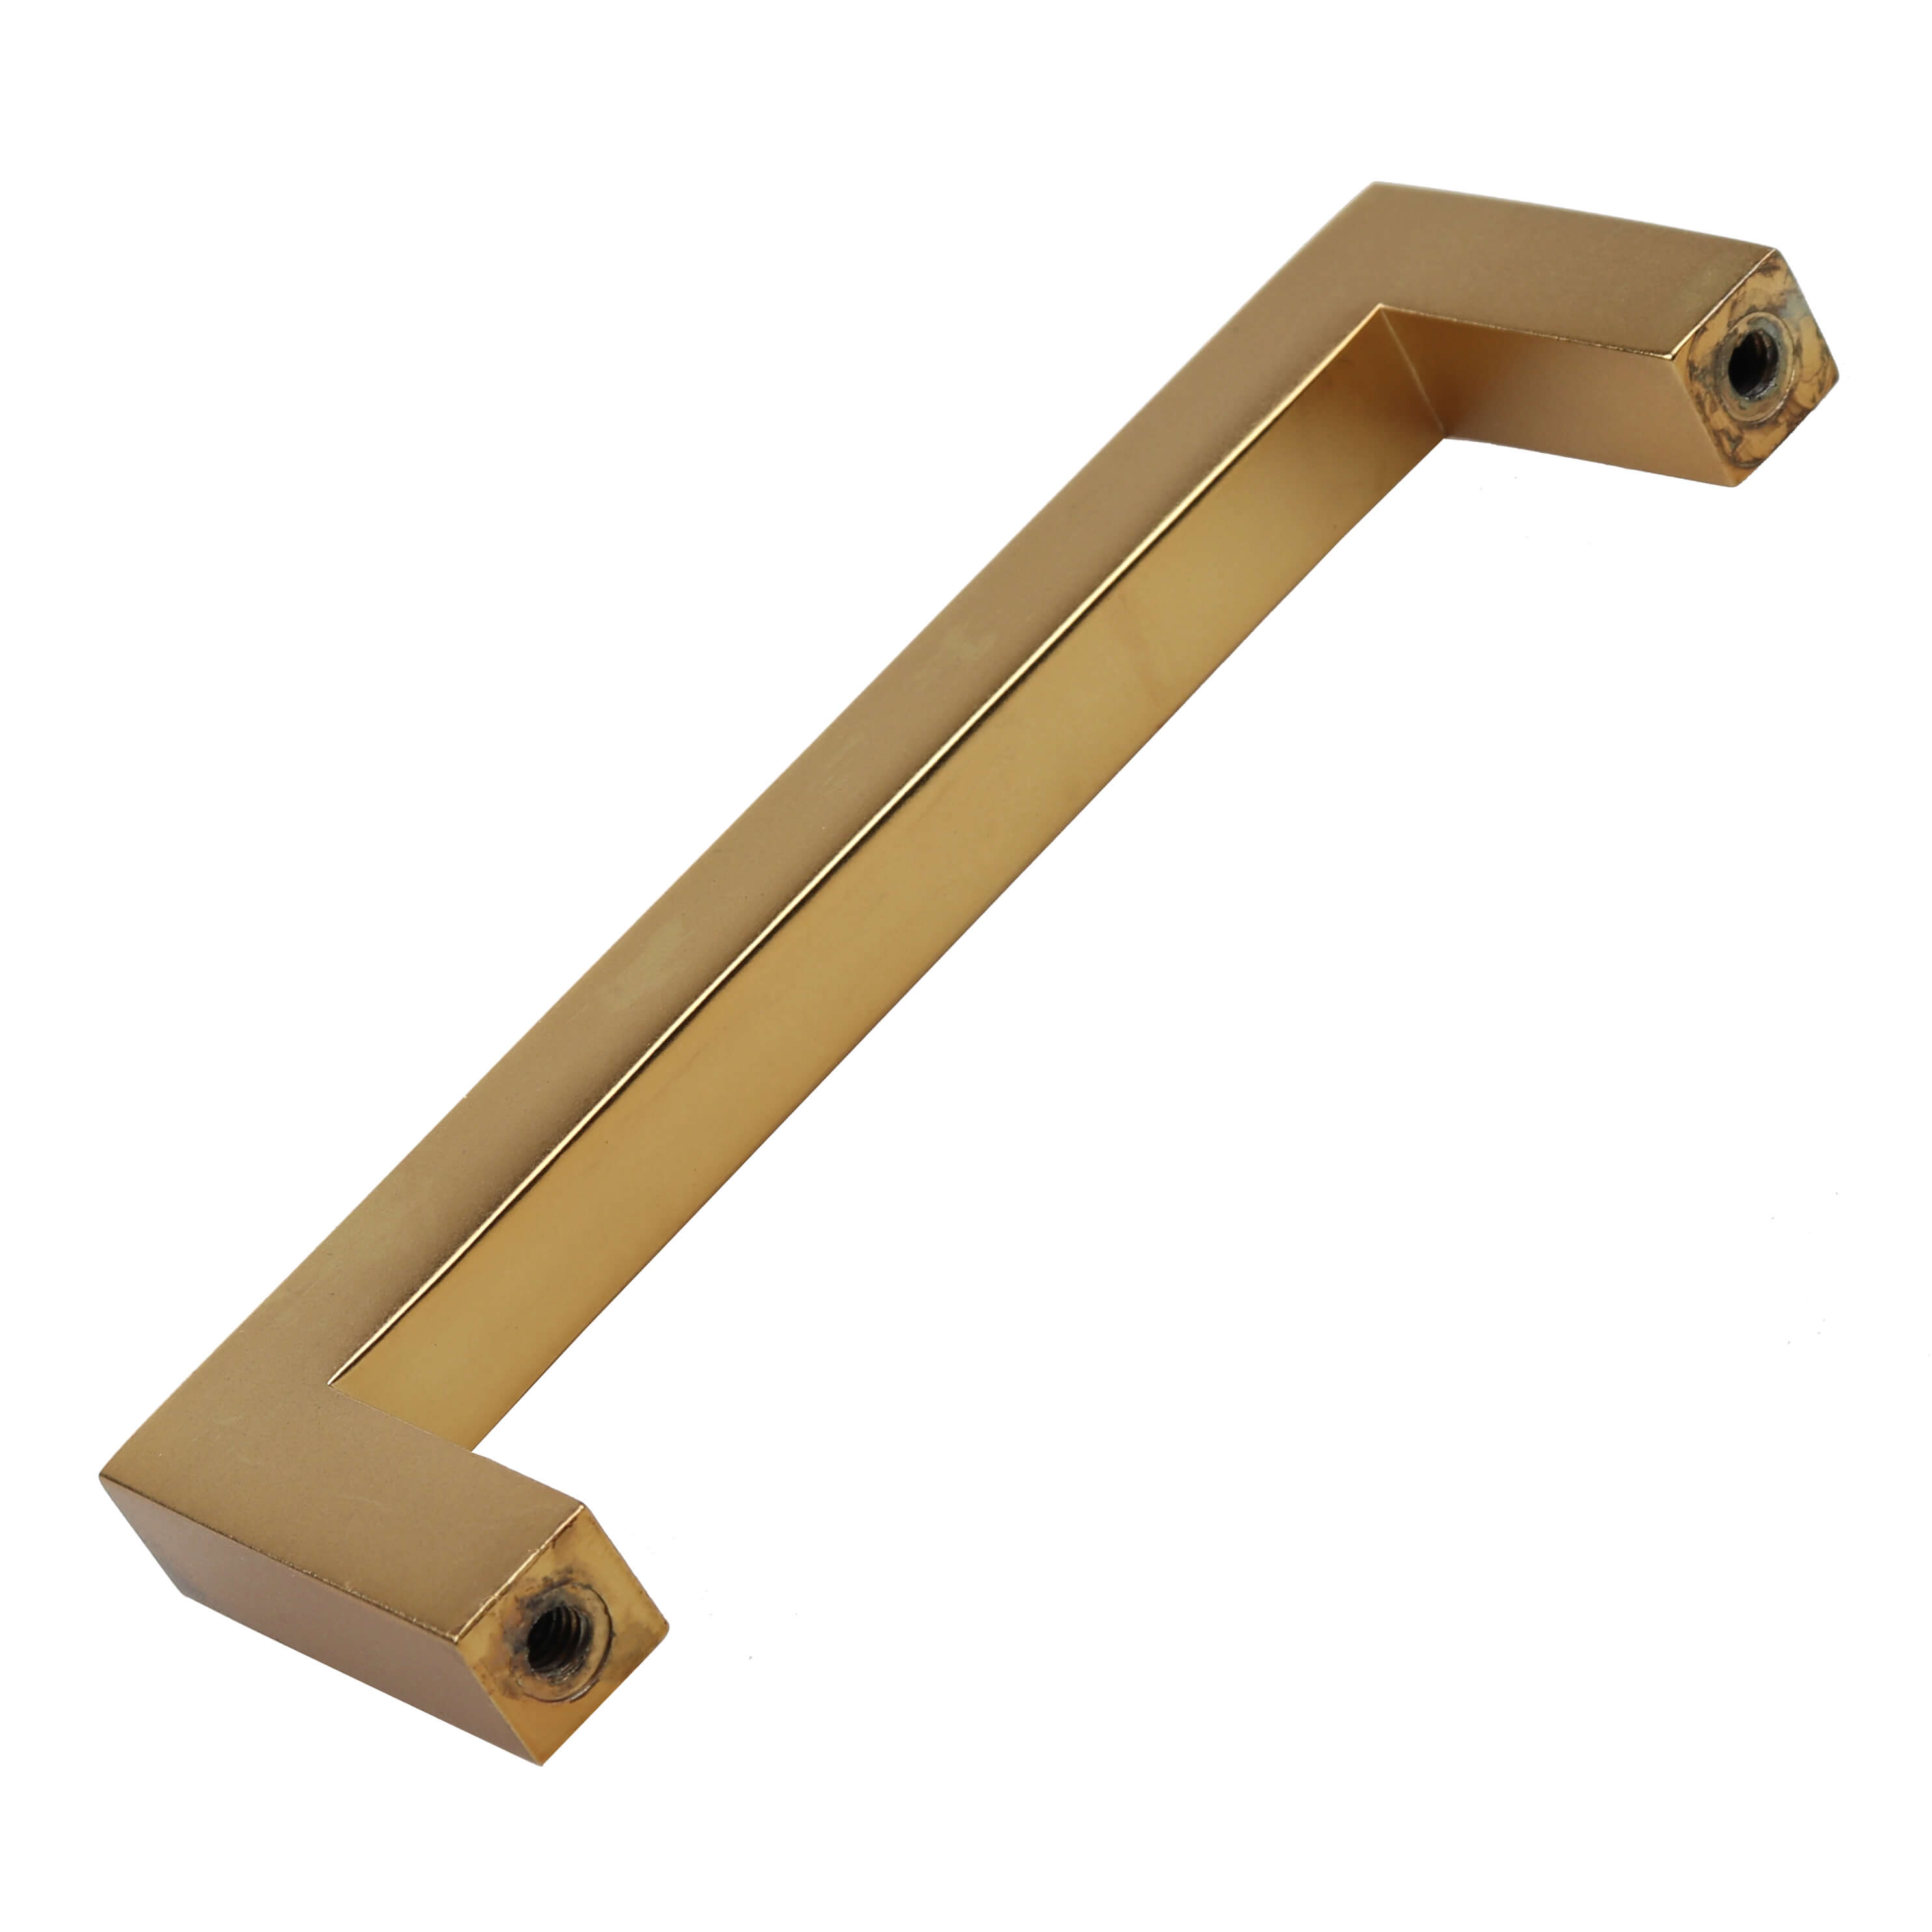 GlideRite 3-3/4 in. Center Solid Square Bar Cabinet Pulls, Brass Gold, Pack of 10 - image 3 of 3